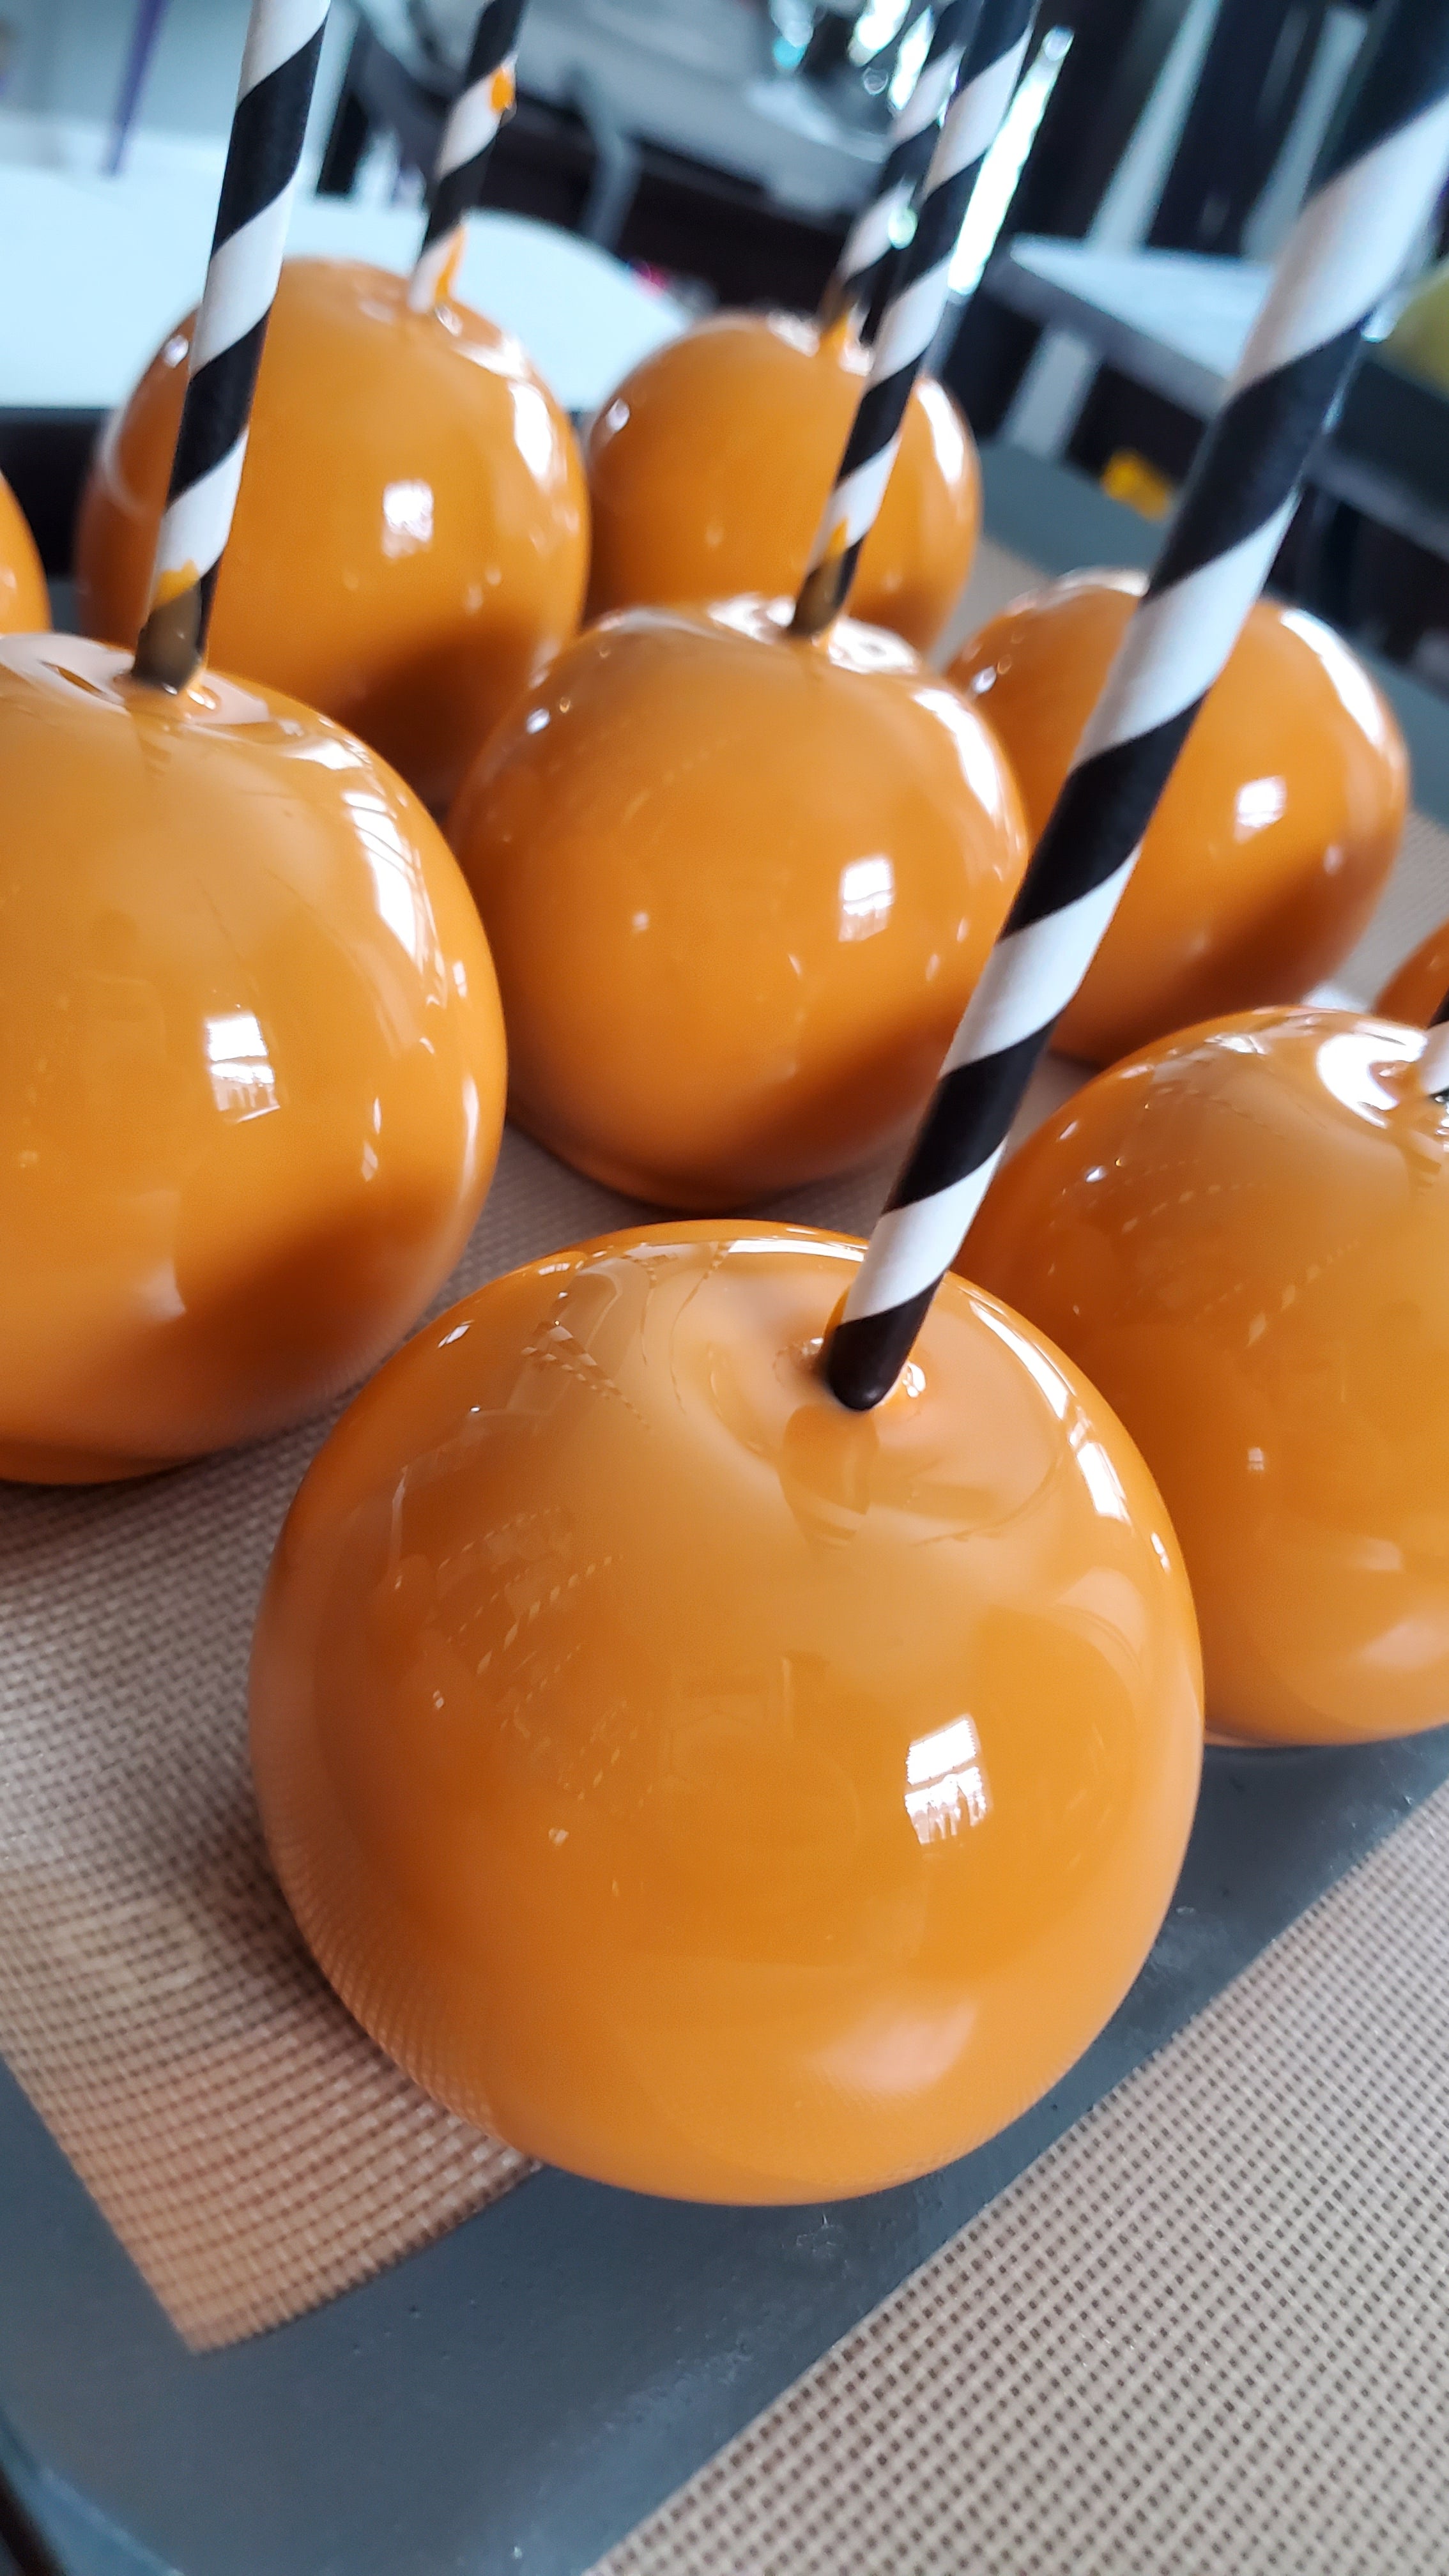 Hard Candy Apples